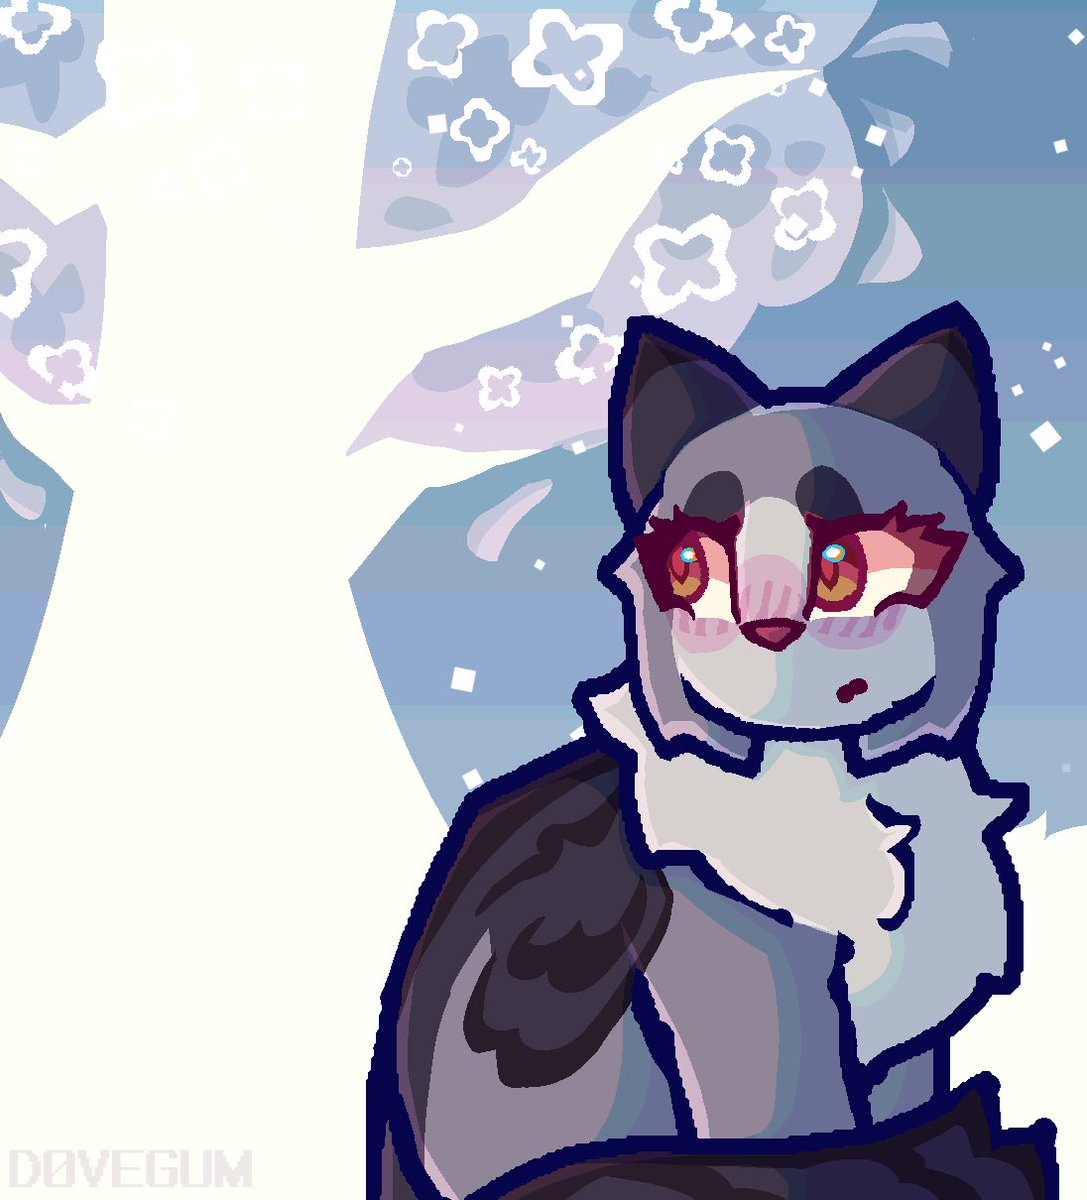 i won’t be out for very long, you’ll see how time flies 

#warriorcats #dovewing